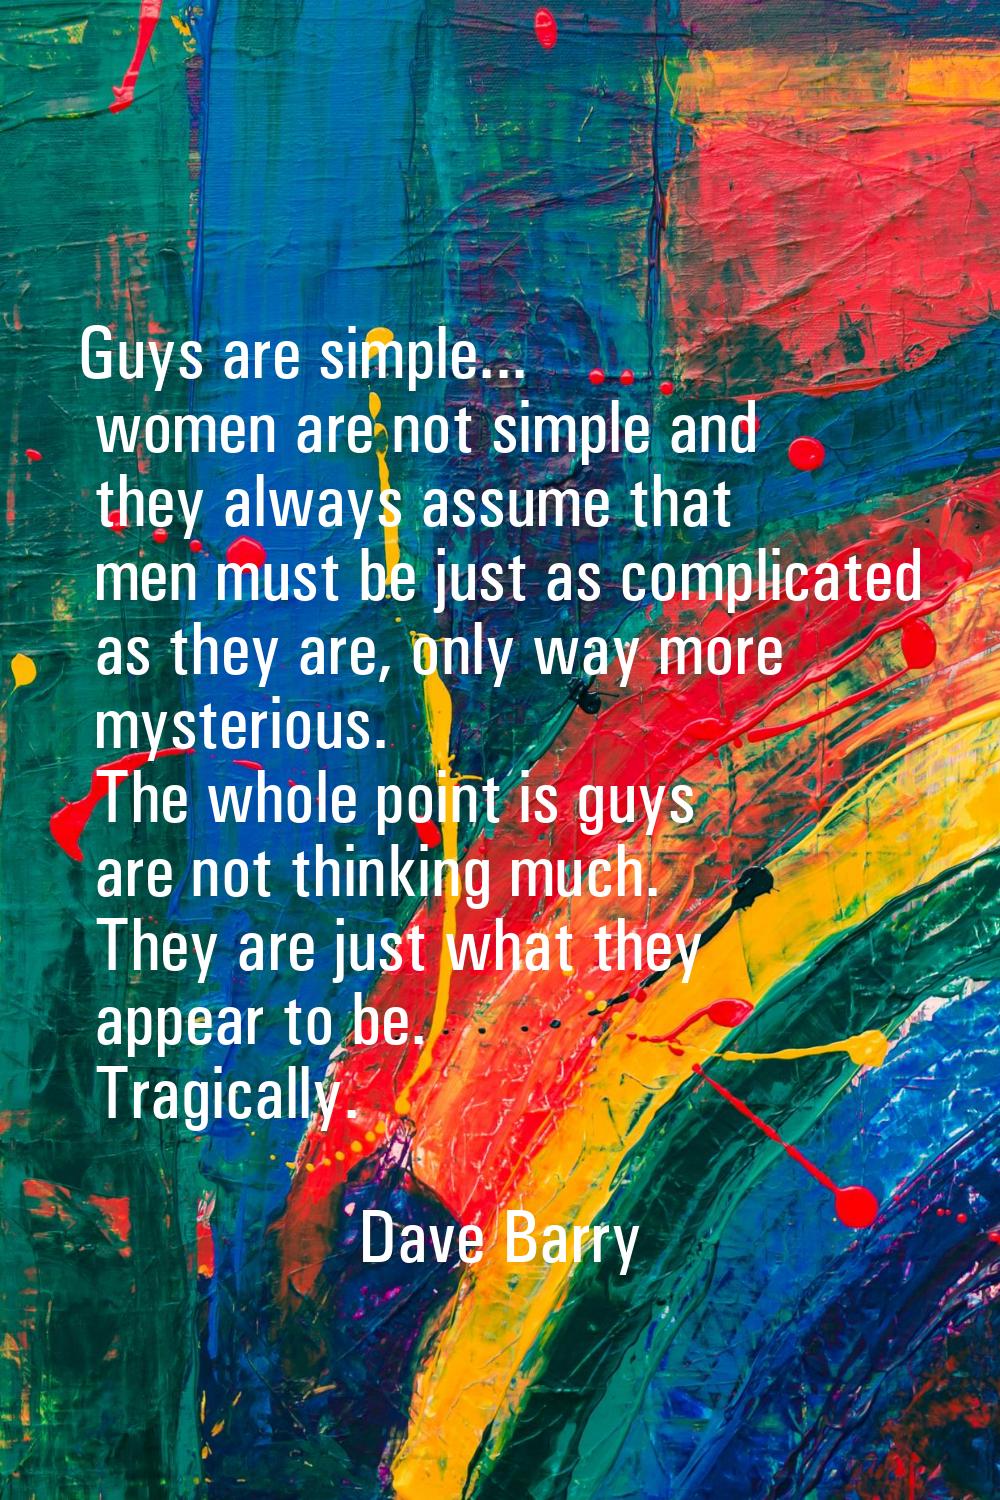 Guys are simple... women are not simple and they always assume that men must be just as complicated